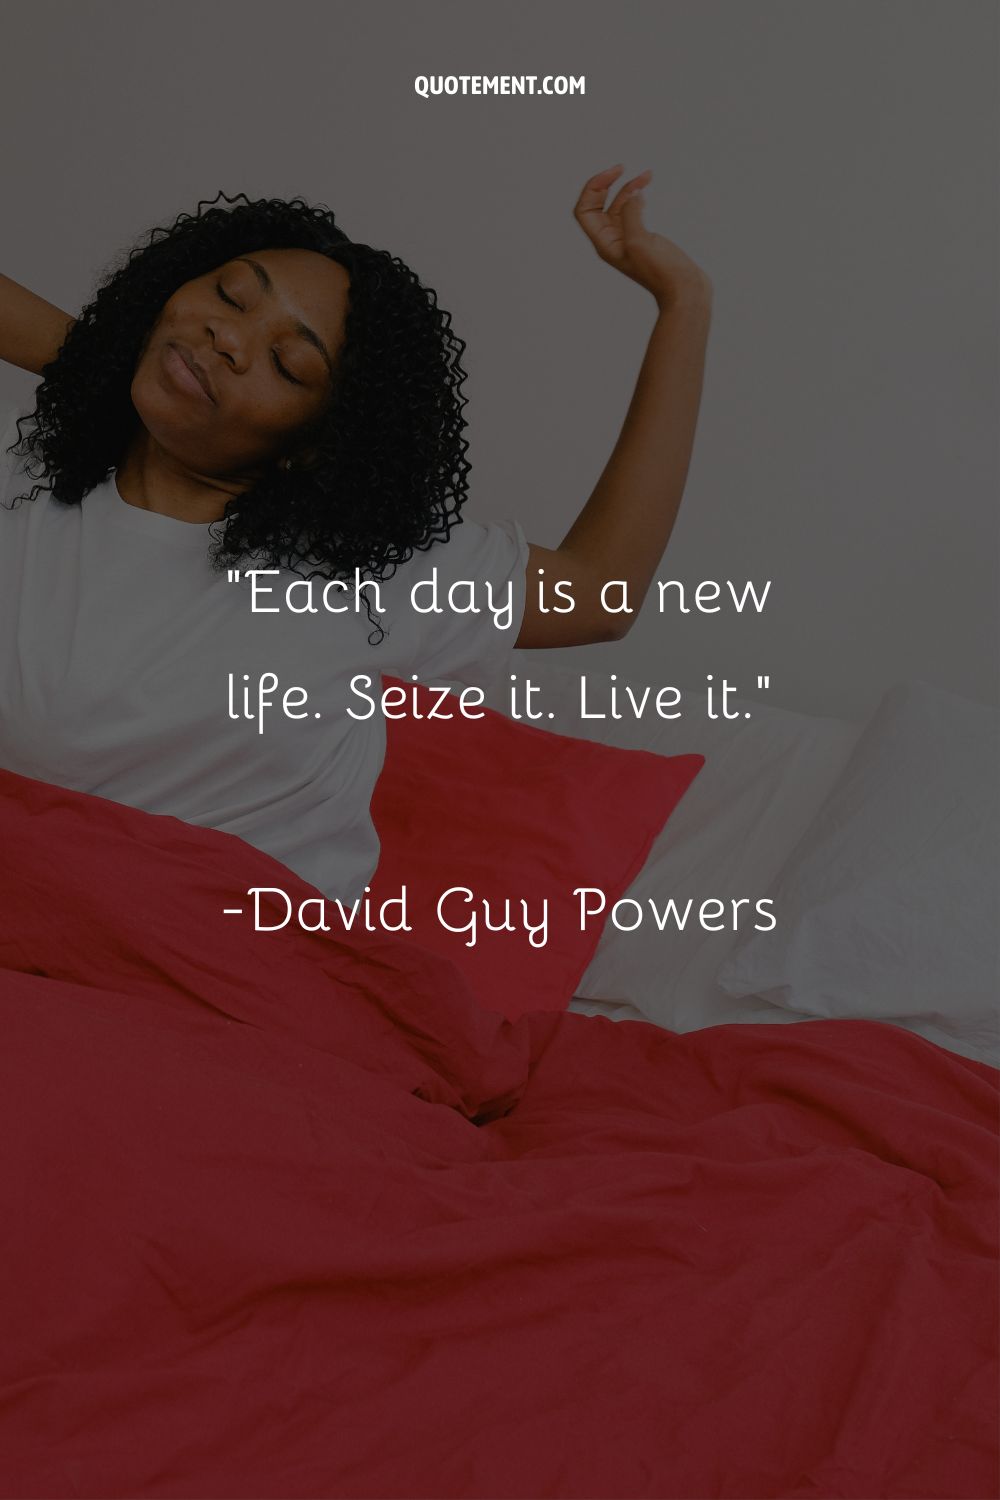 Each day is a new life. Seize it. Live it